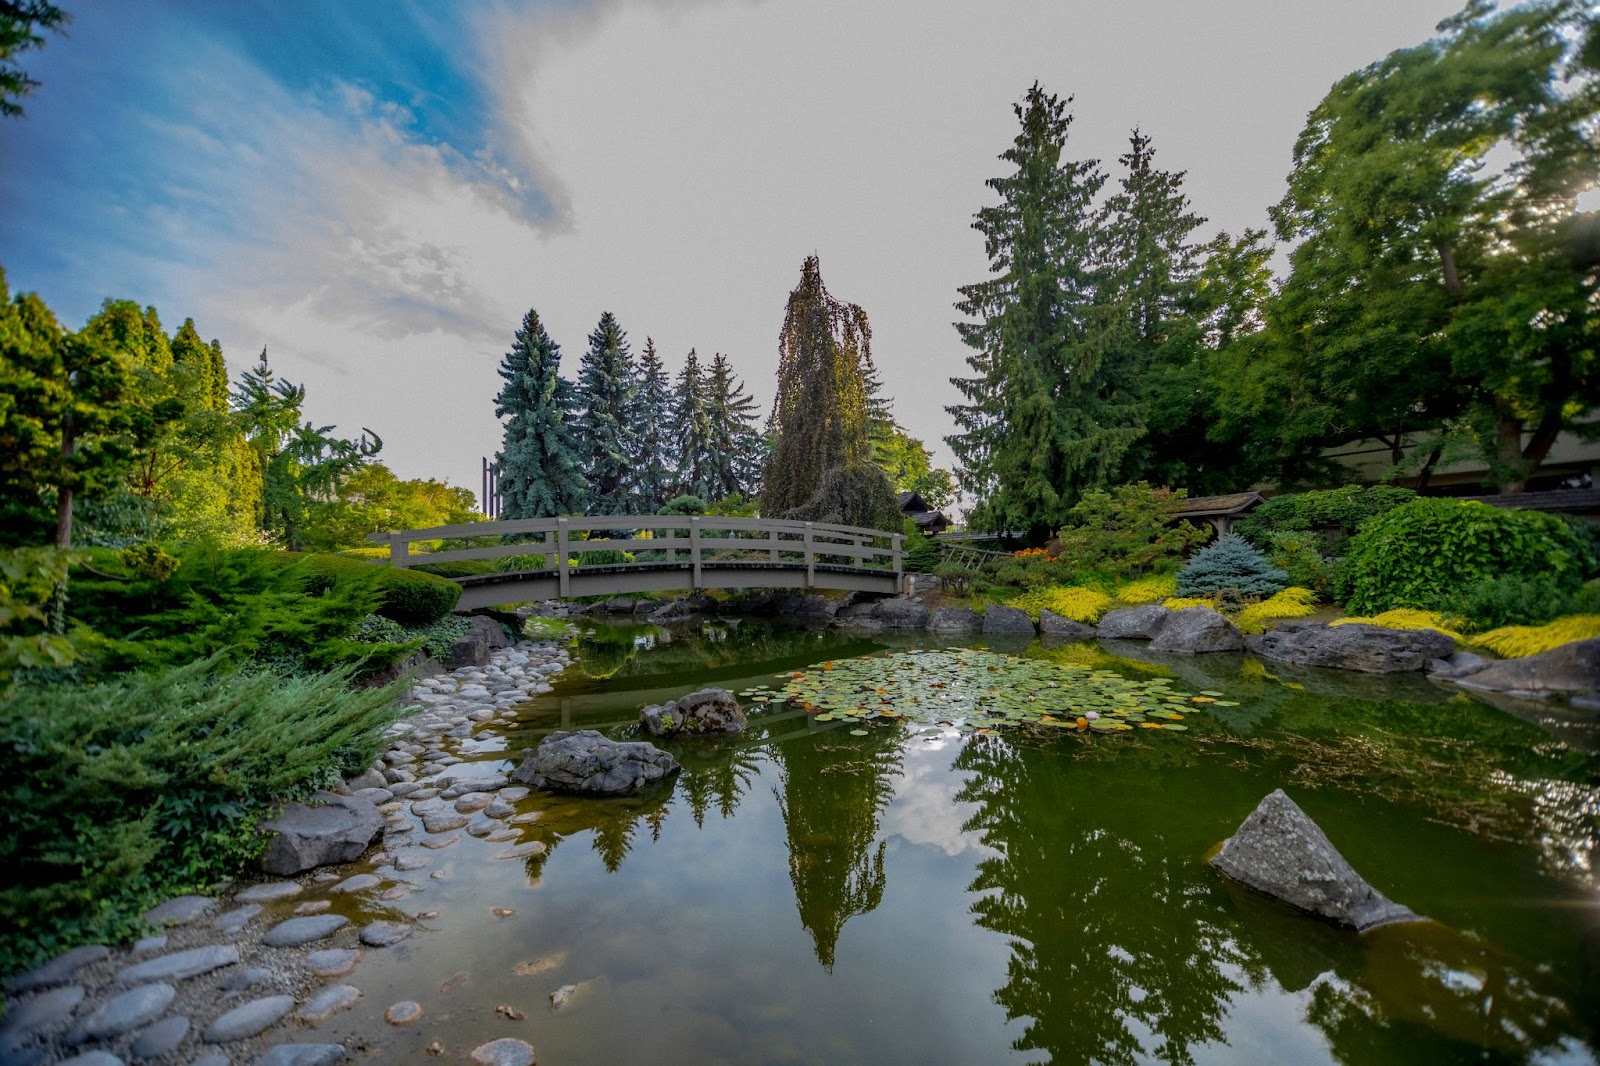 Kasugai gardens in Kelowna, showing the Koi pond with a walking bridge over the water